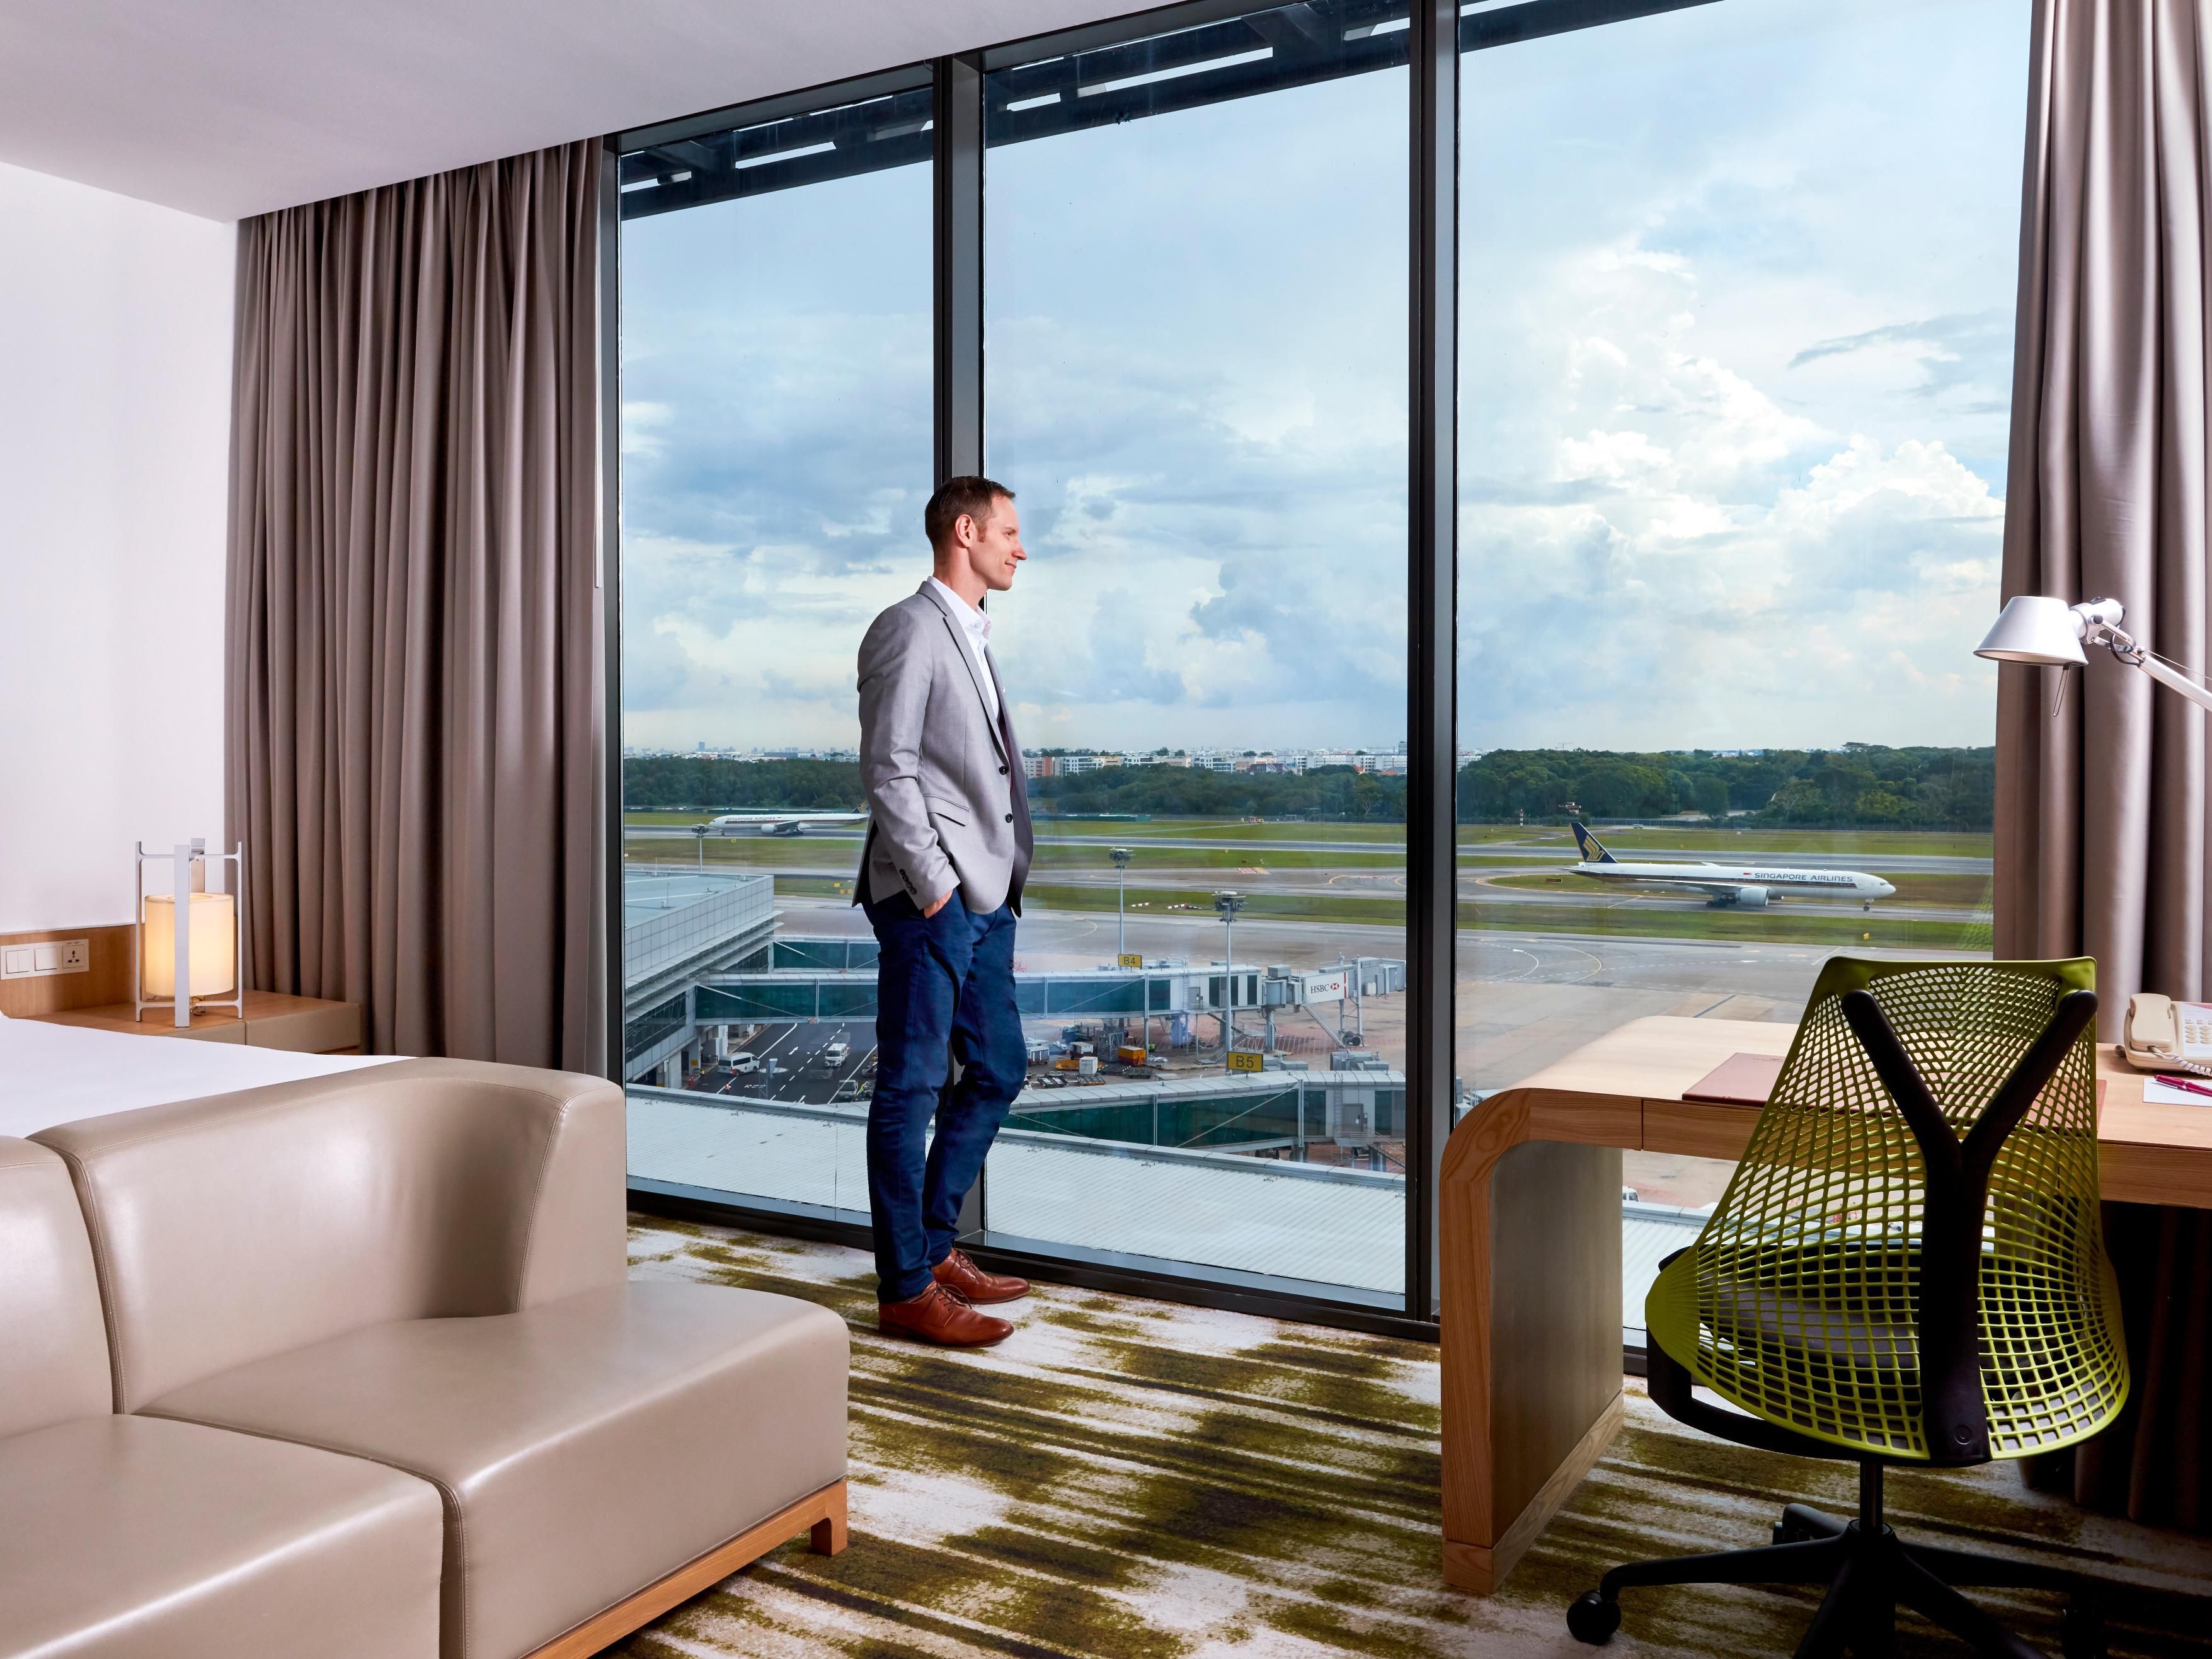 Enjoy spectacular views of the runway from our Premier Rooms with Runway View. The rooms provide a relaxing respite for travellers, with luxurious bedding and spacious bathrooms with soaking tubs and walk-in rainfall showers and complimentary Wi-Fi.